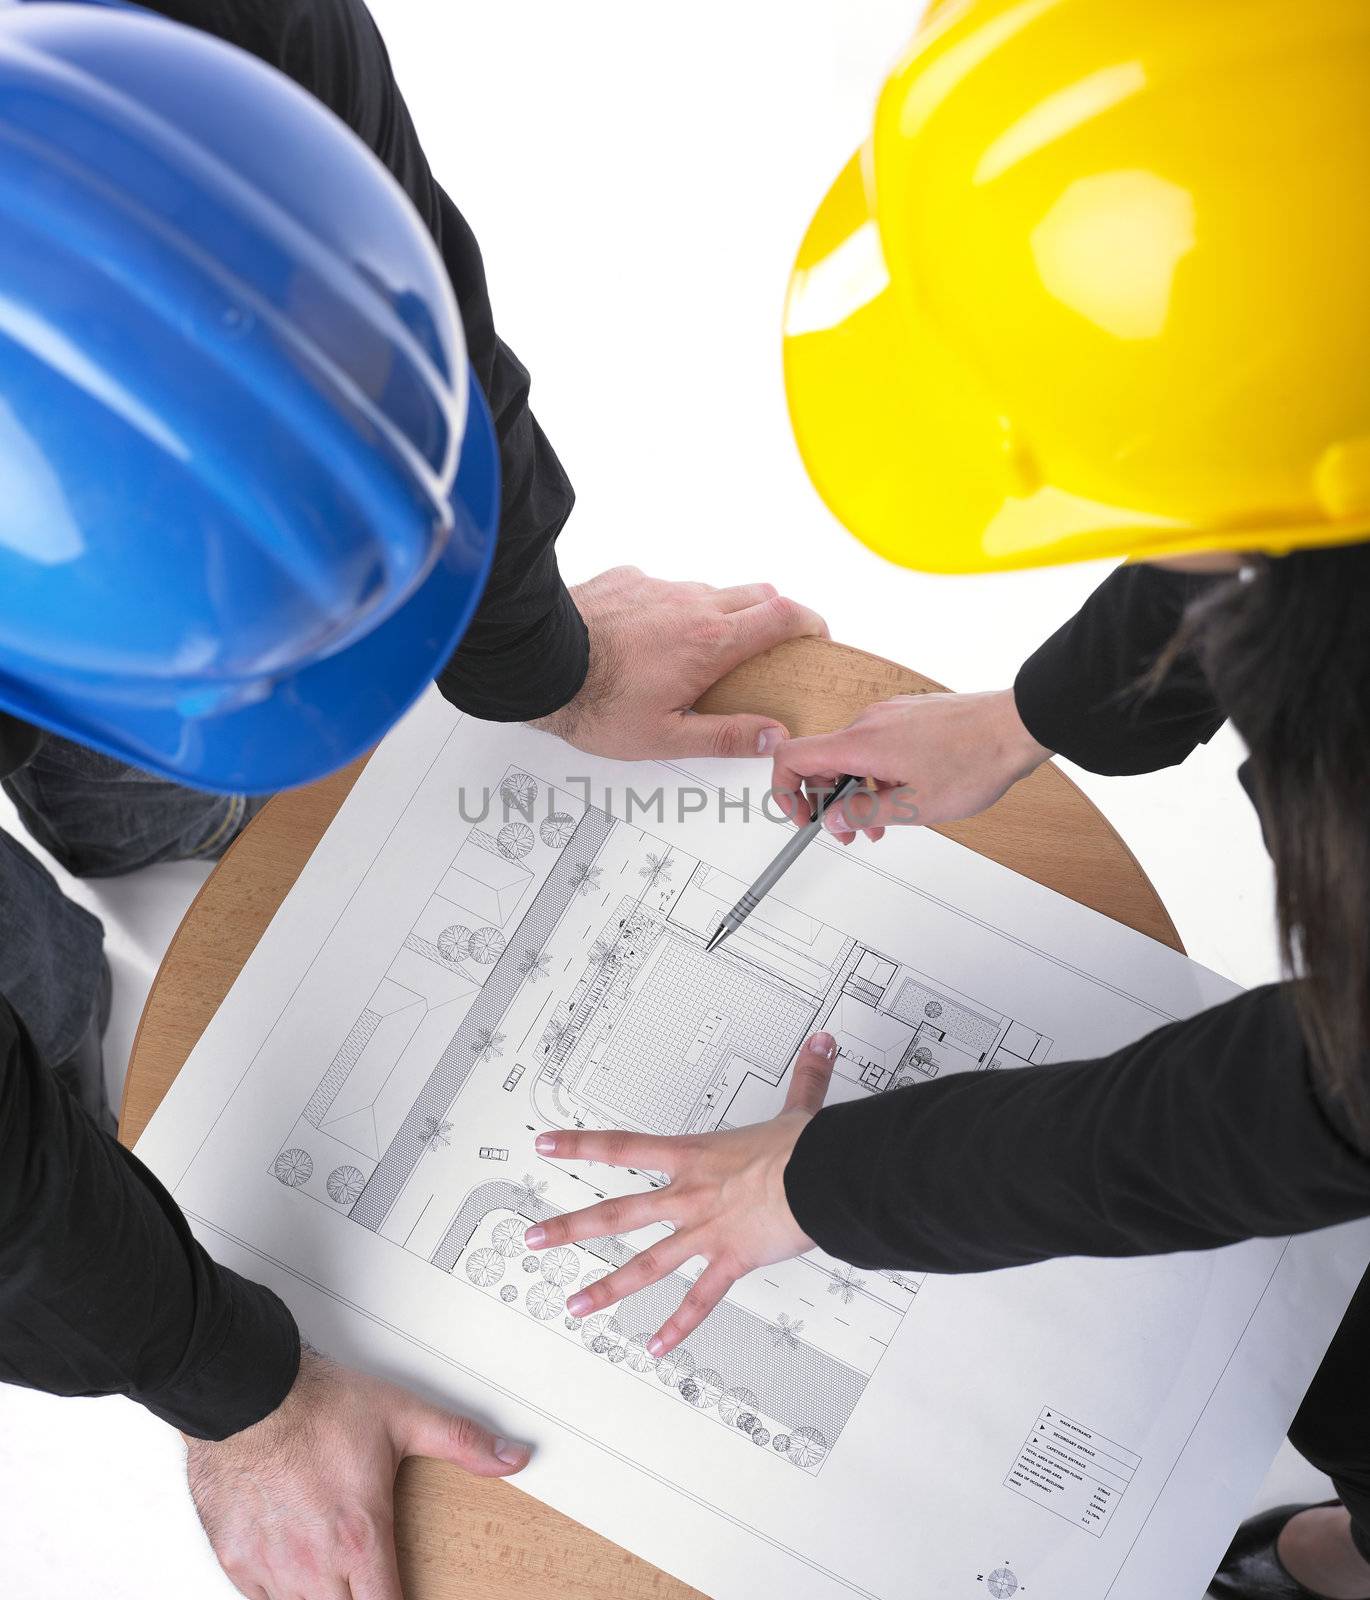 Two architects with hard hats and plan on meeting in office